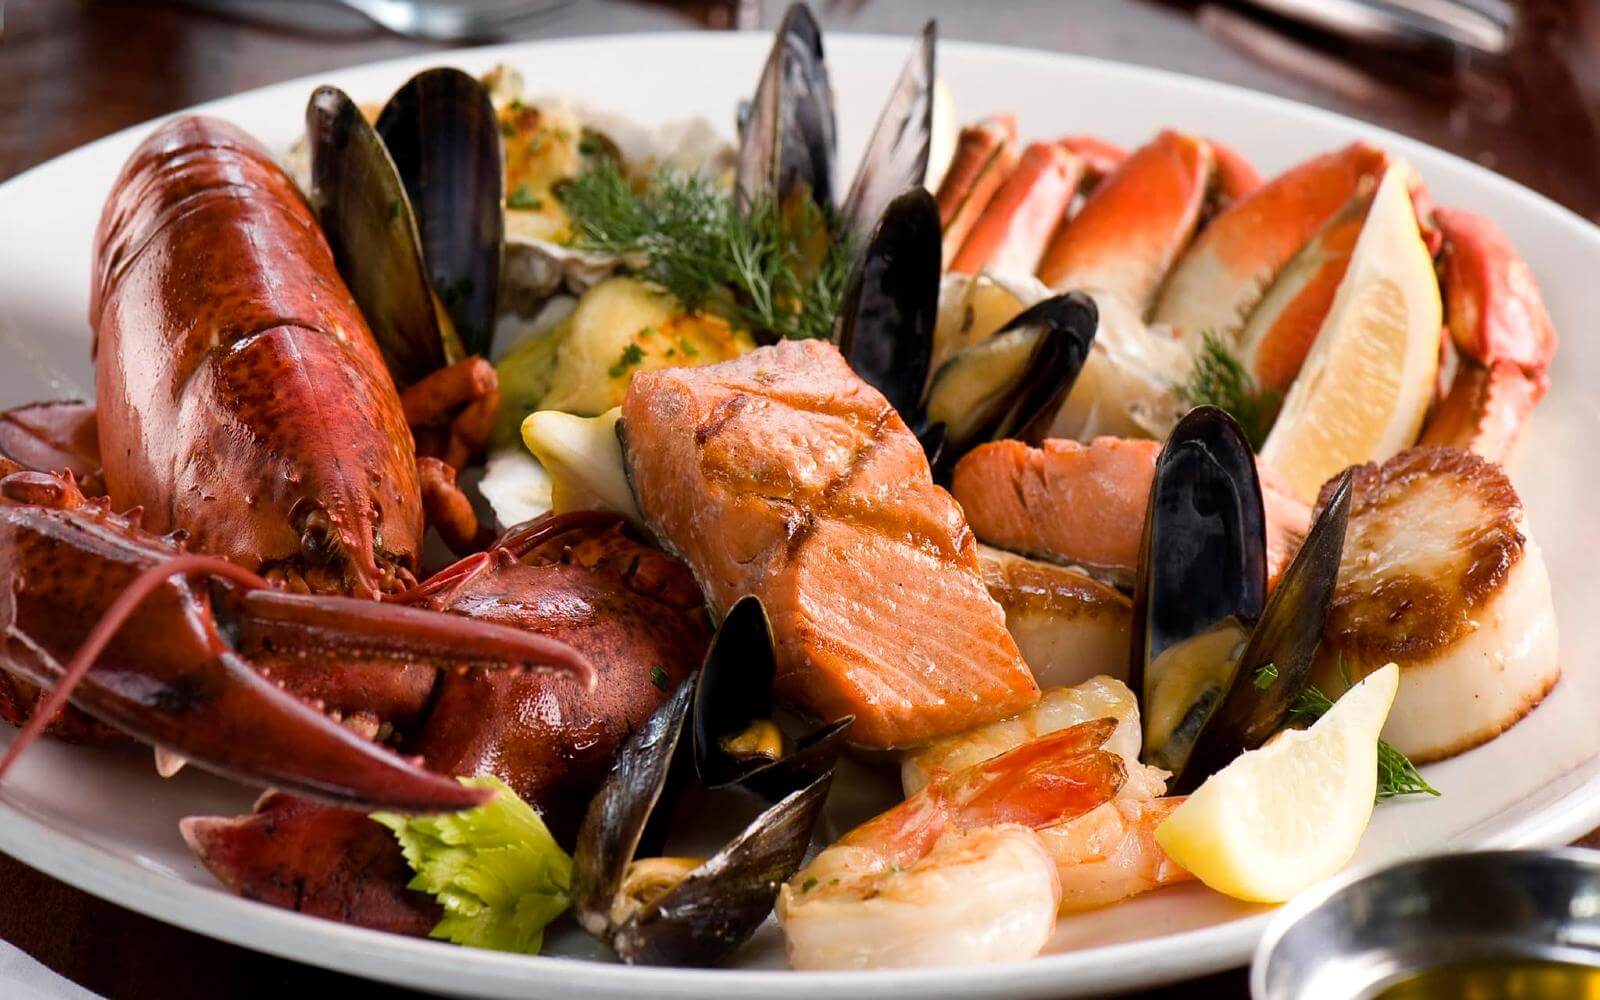 a fresh seafood platter at joe fortes restaurant in vancouver bc canada